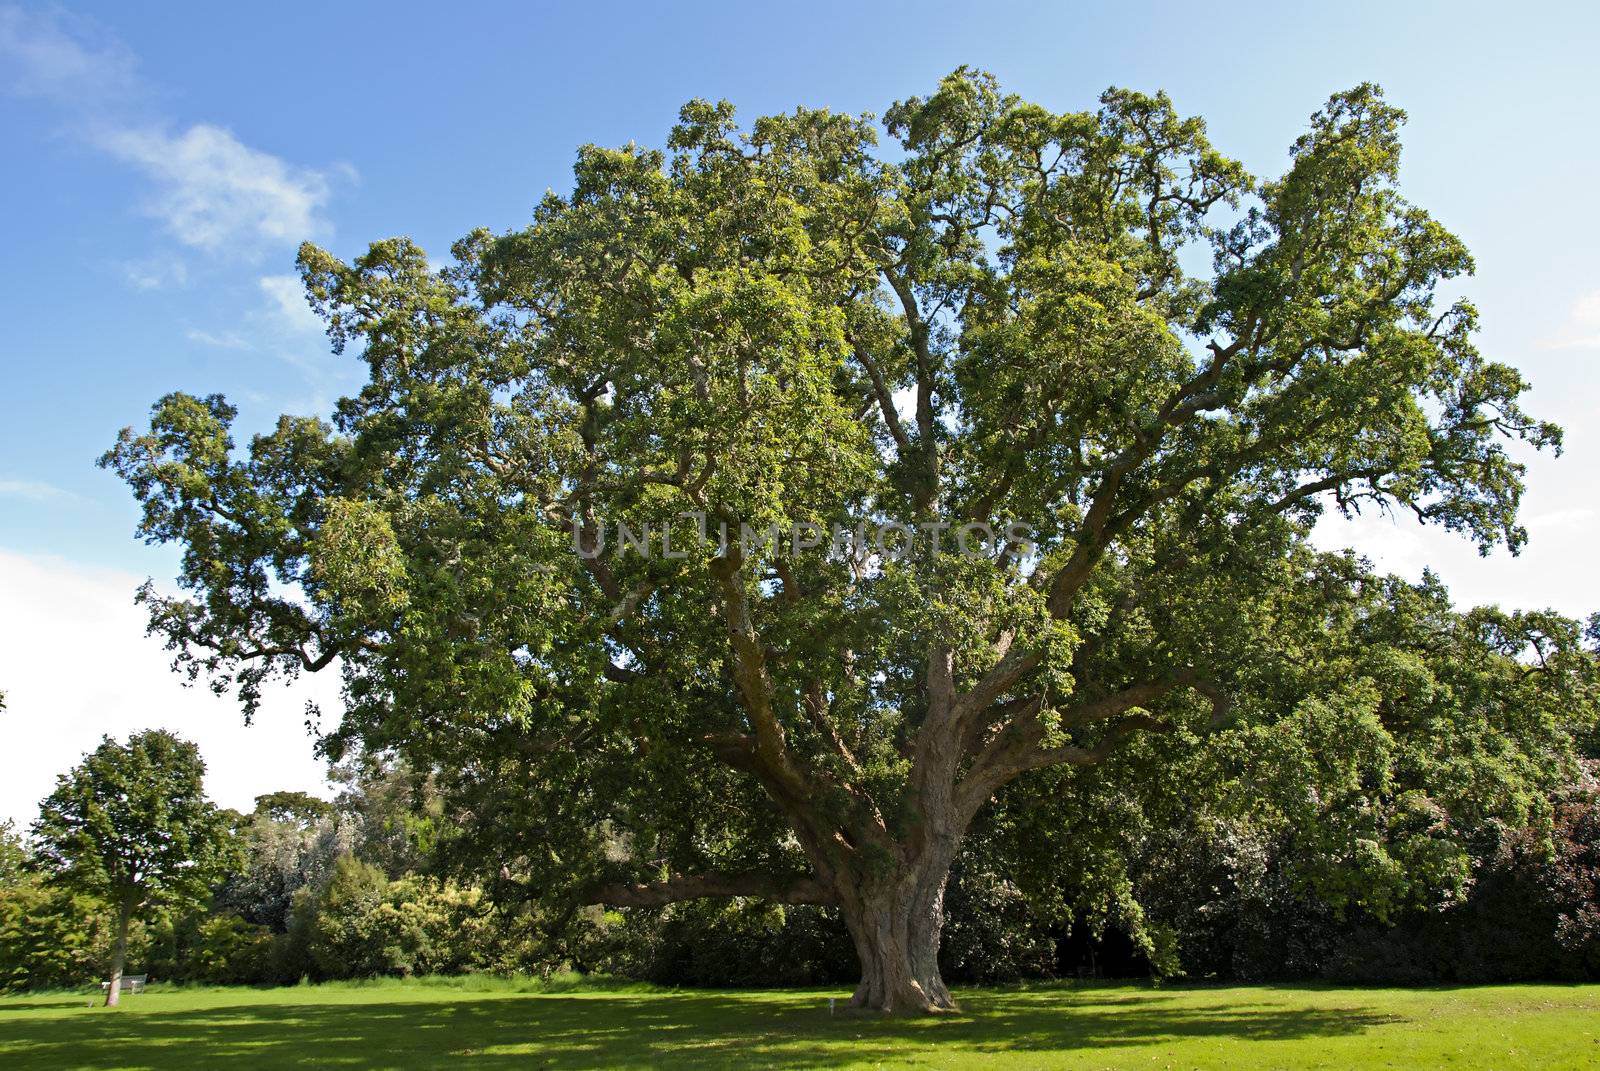 A Large Cork Oak Tree (Quercus  suber) in an English Park